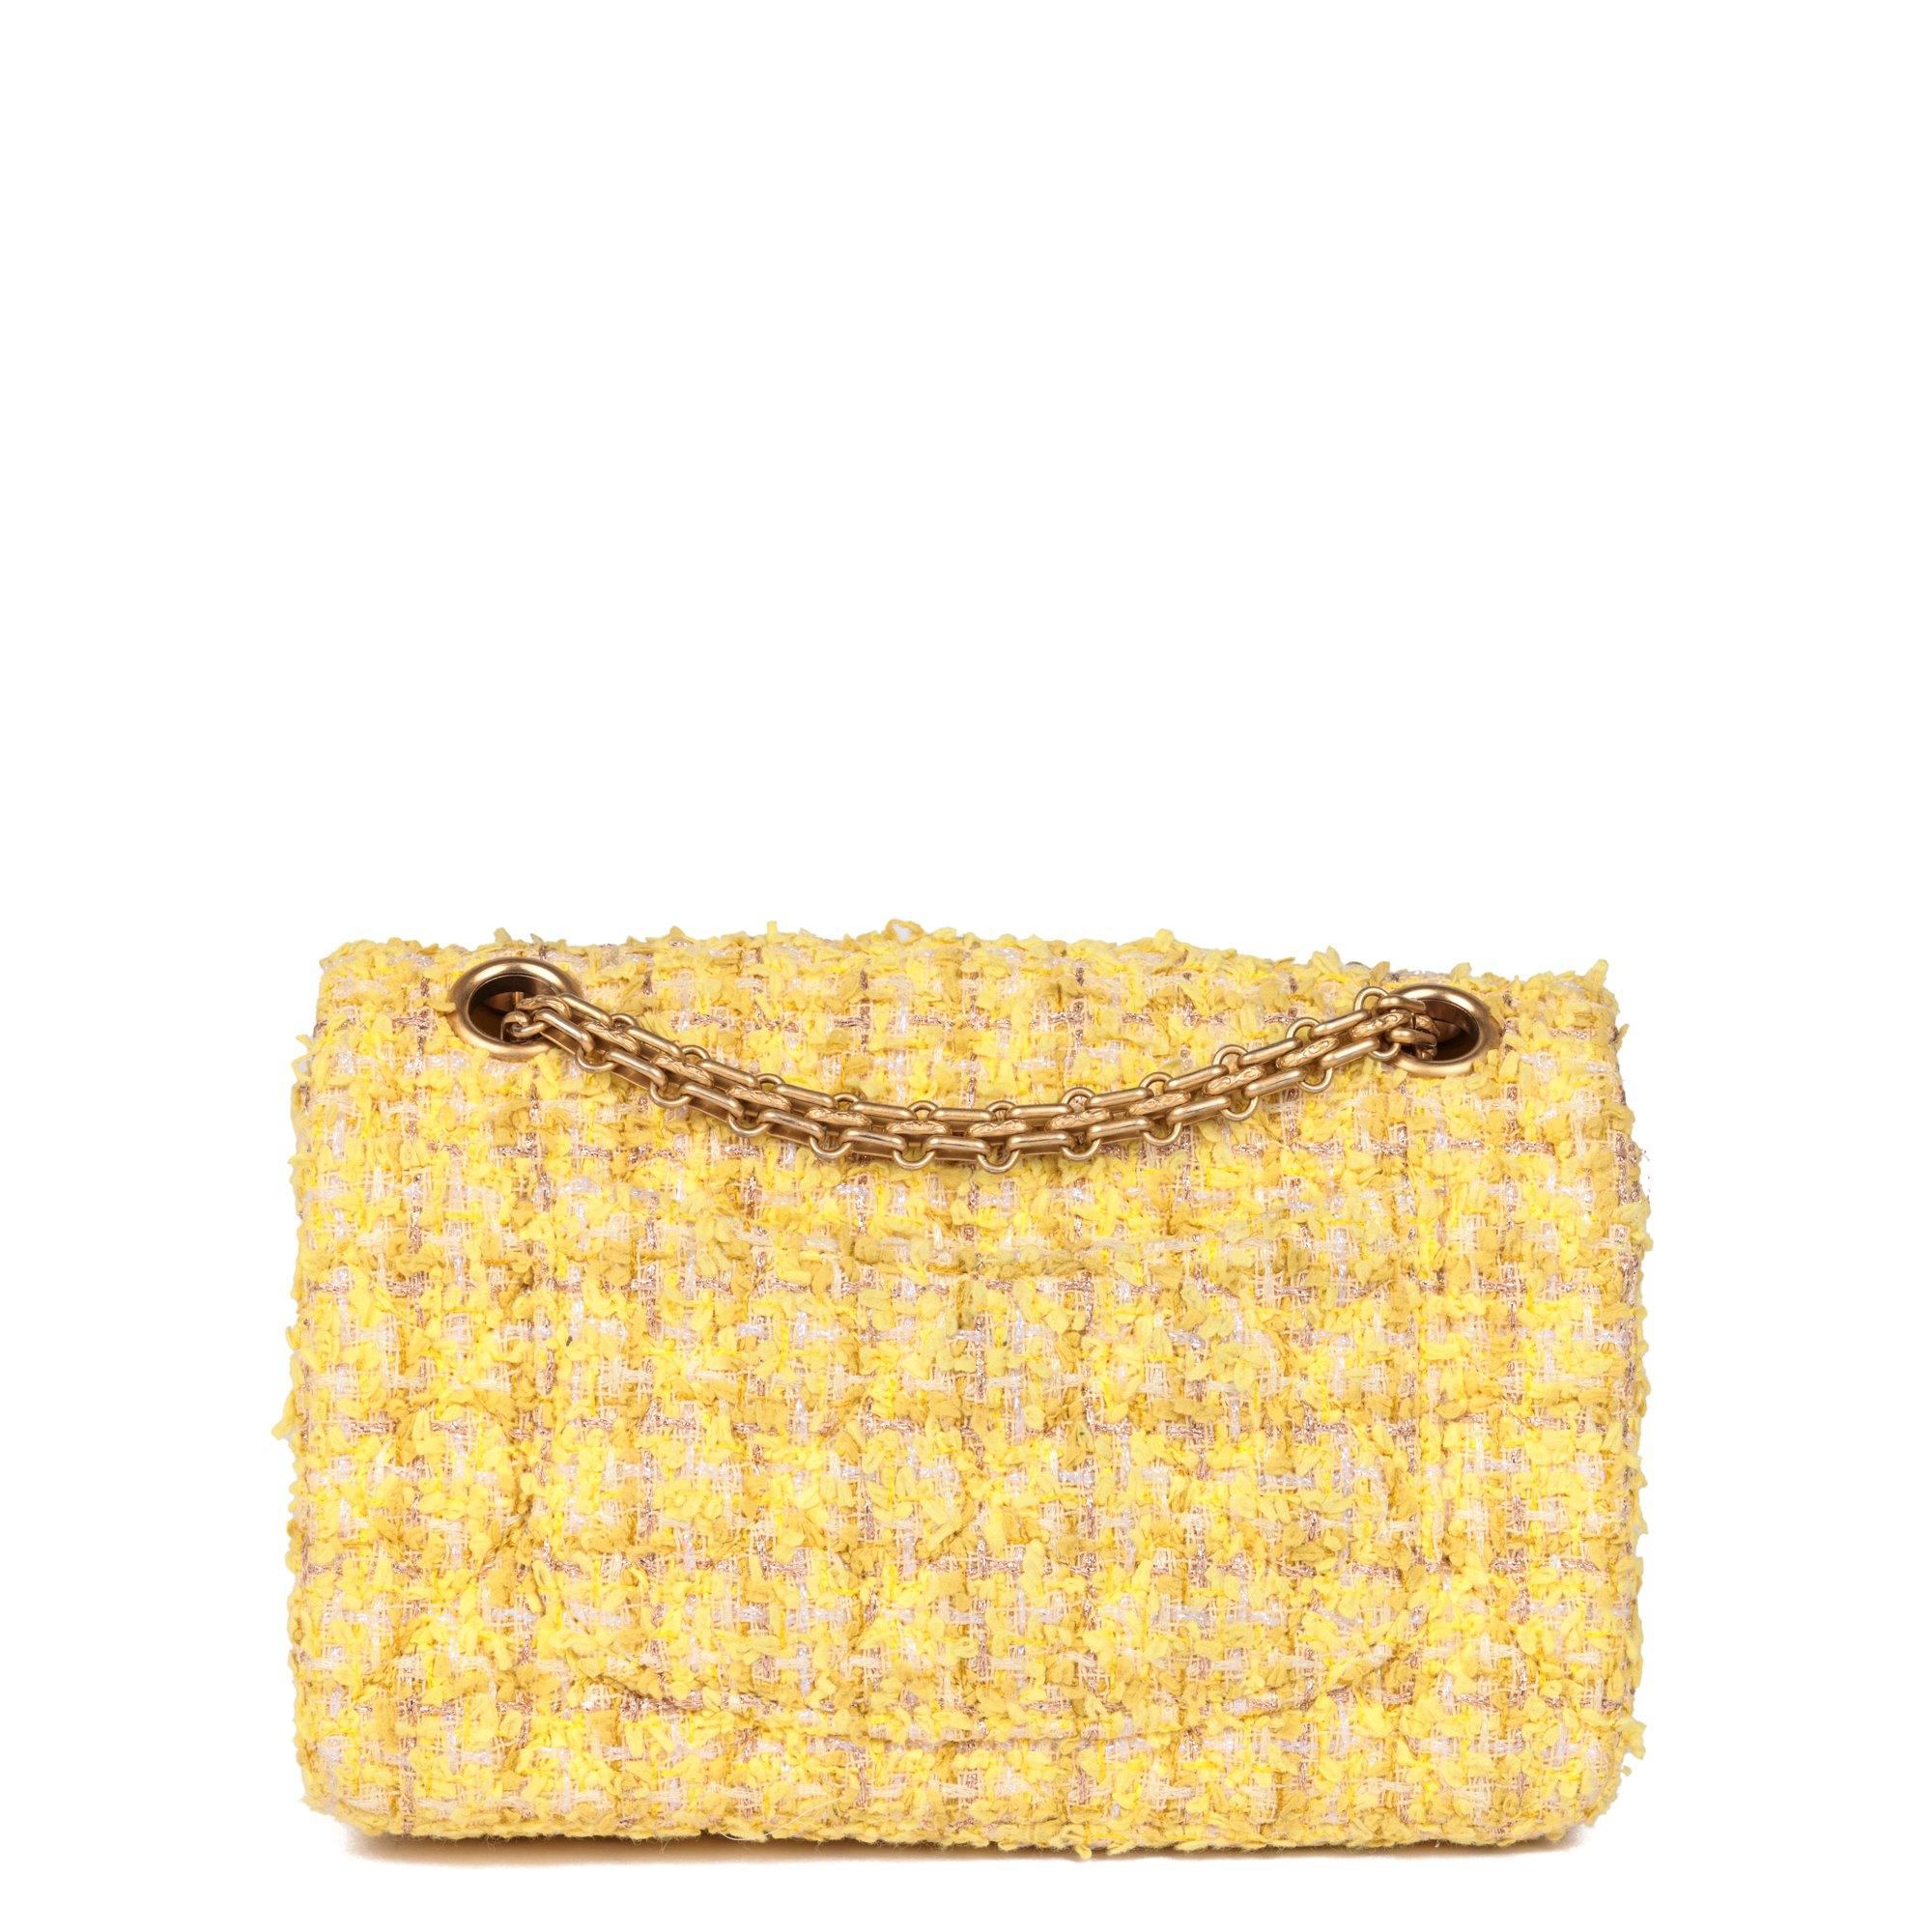 CHANEL Canary Yellow Tweed Fabric 224 2.55 Reissue Double Flap Bag For Sale 1